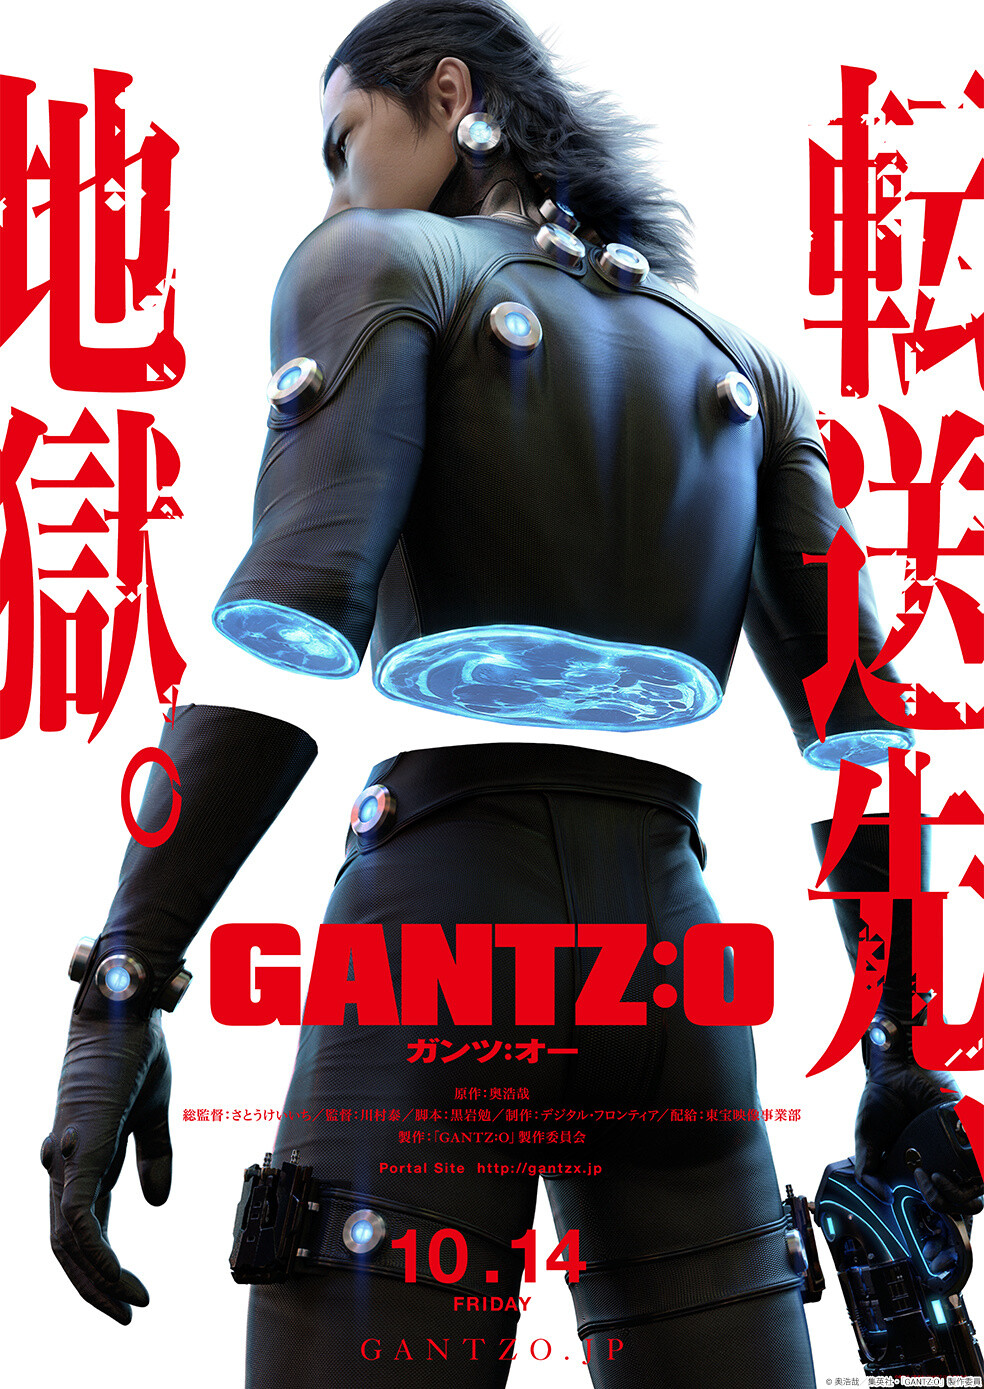 Sneak Preview For Gantz O Revealed And Main Cast Announced Movie News Tom Shop Figures Merch From Japan